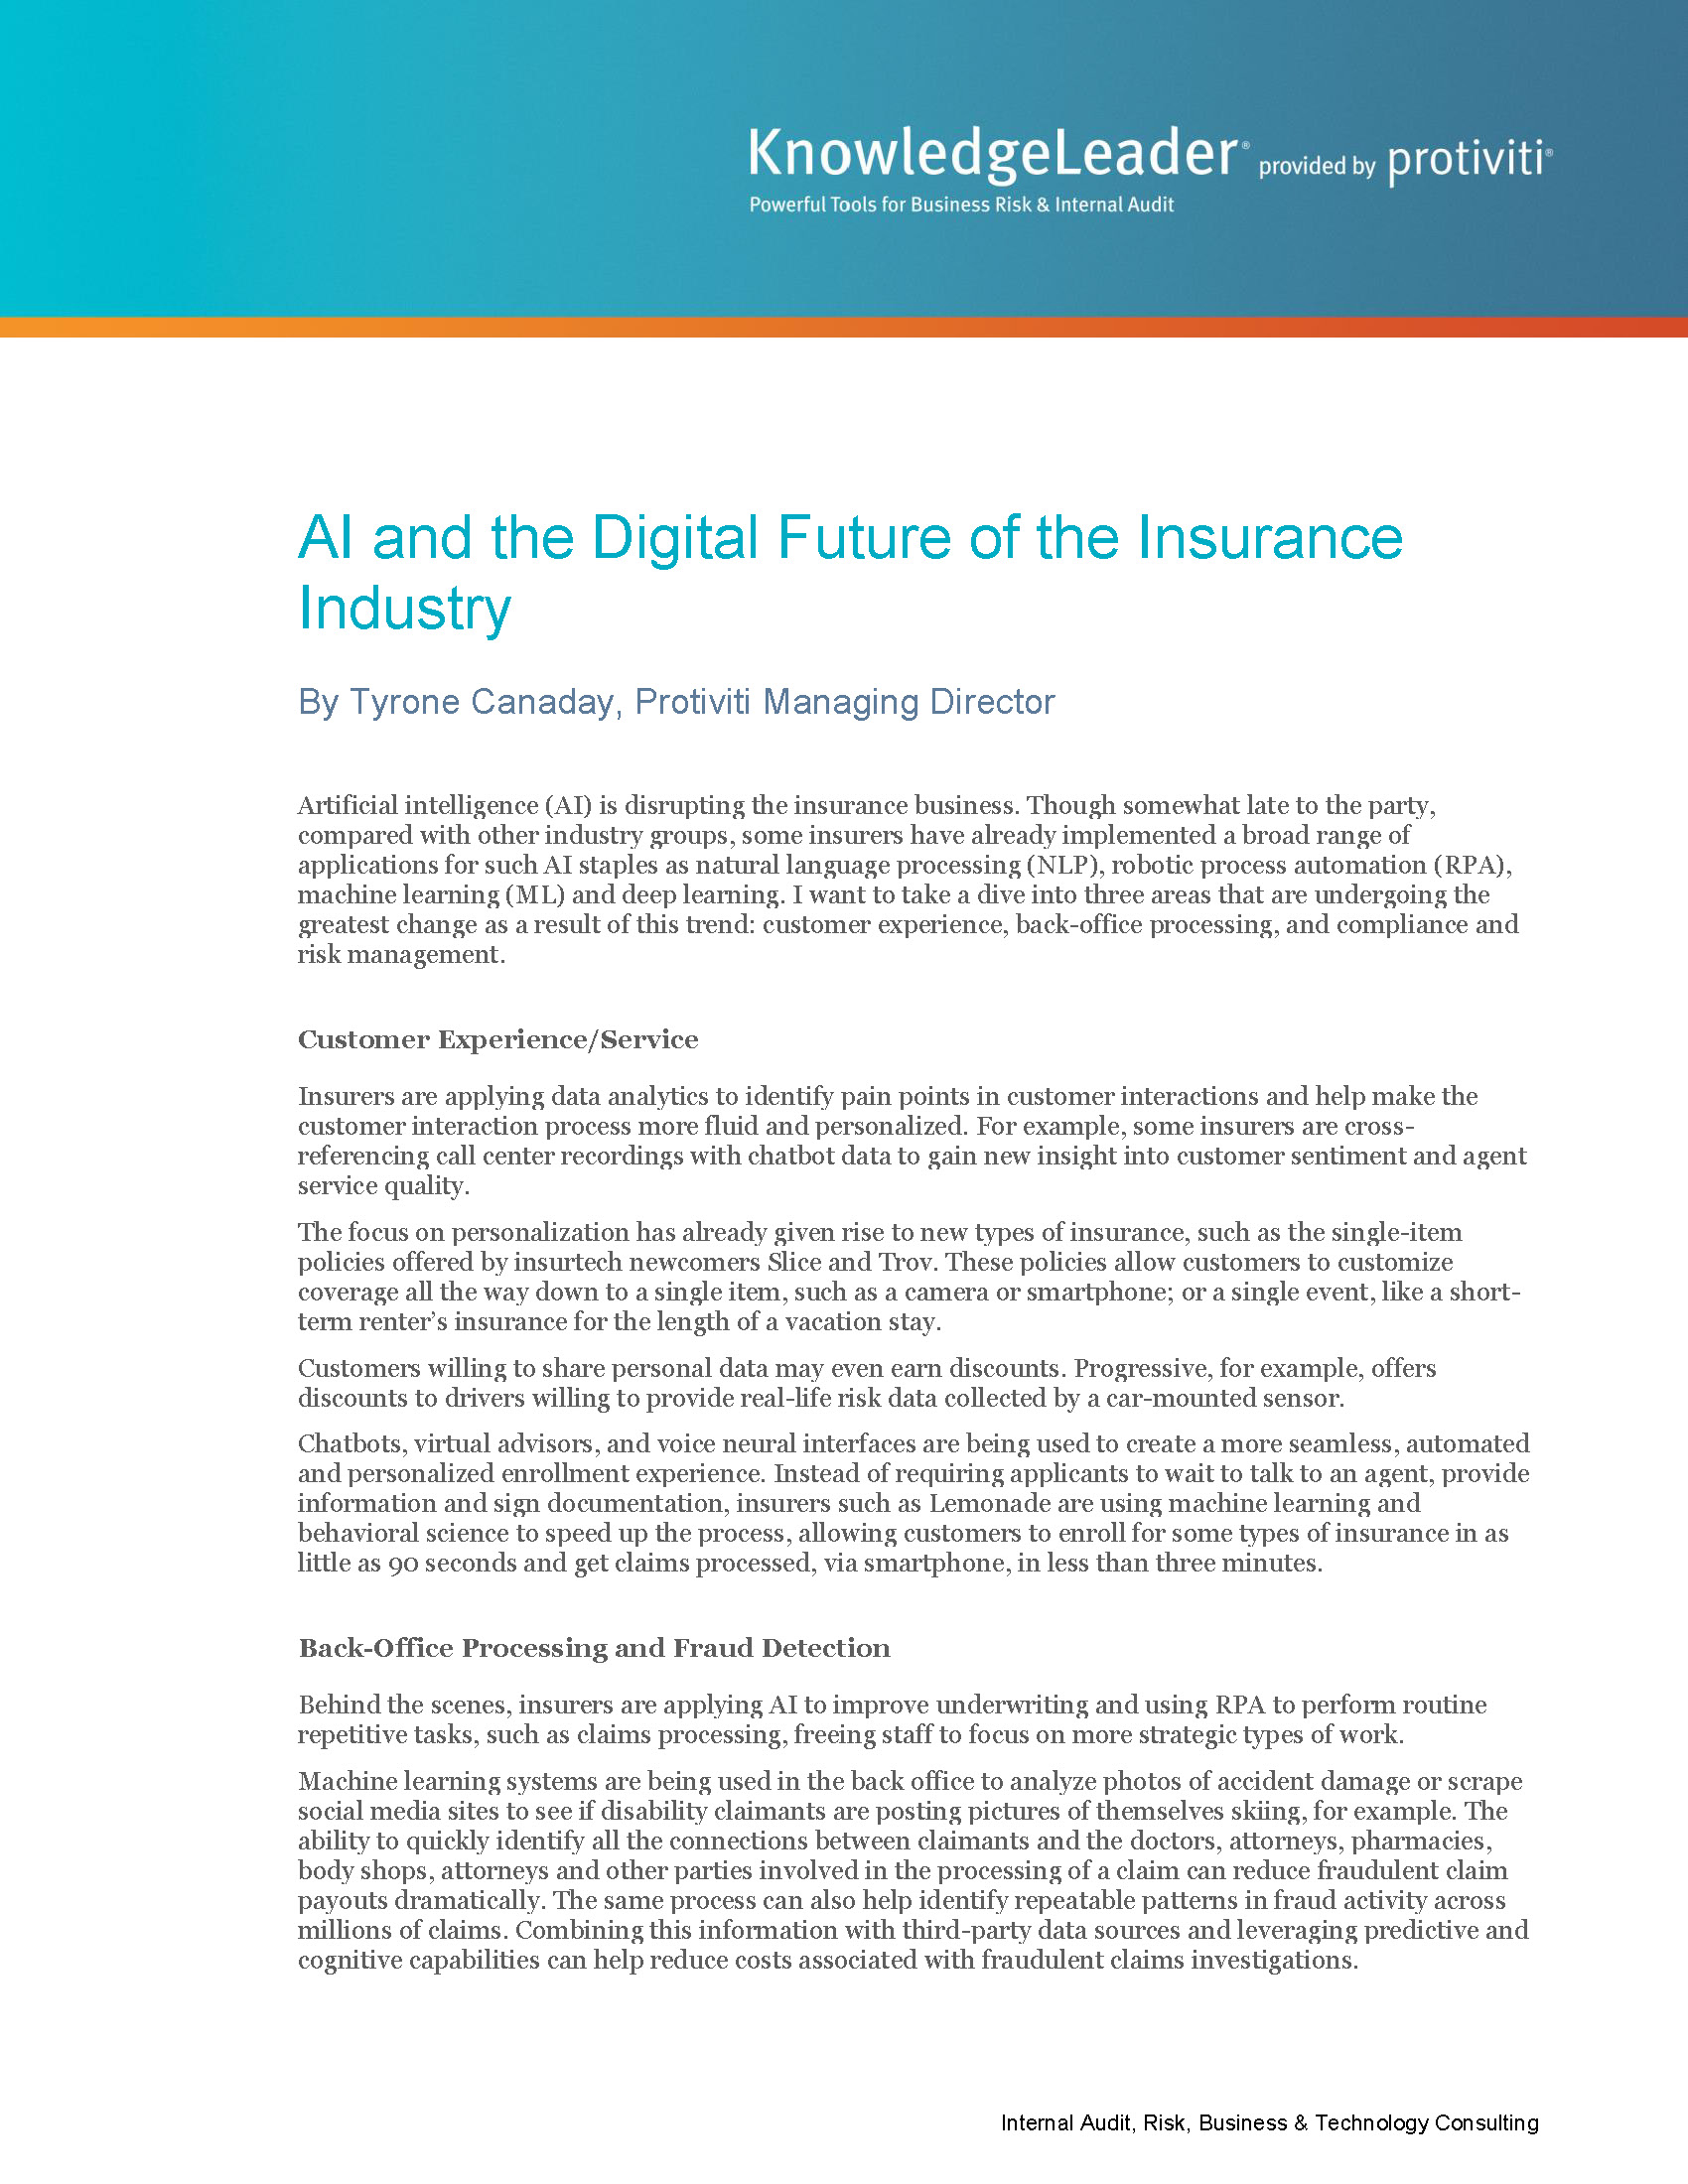 Screenshot of the first page of AI and the Digital Future of the Insurance Industry